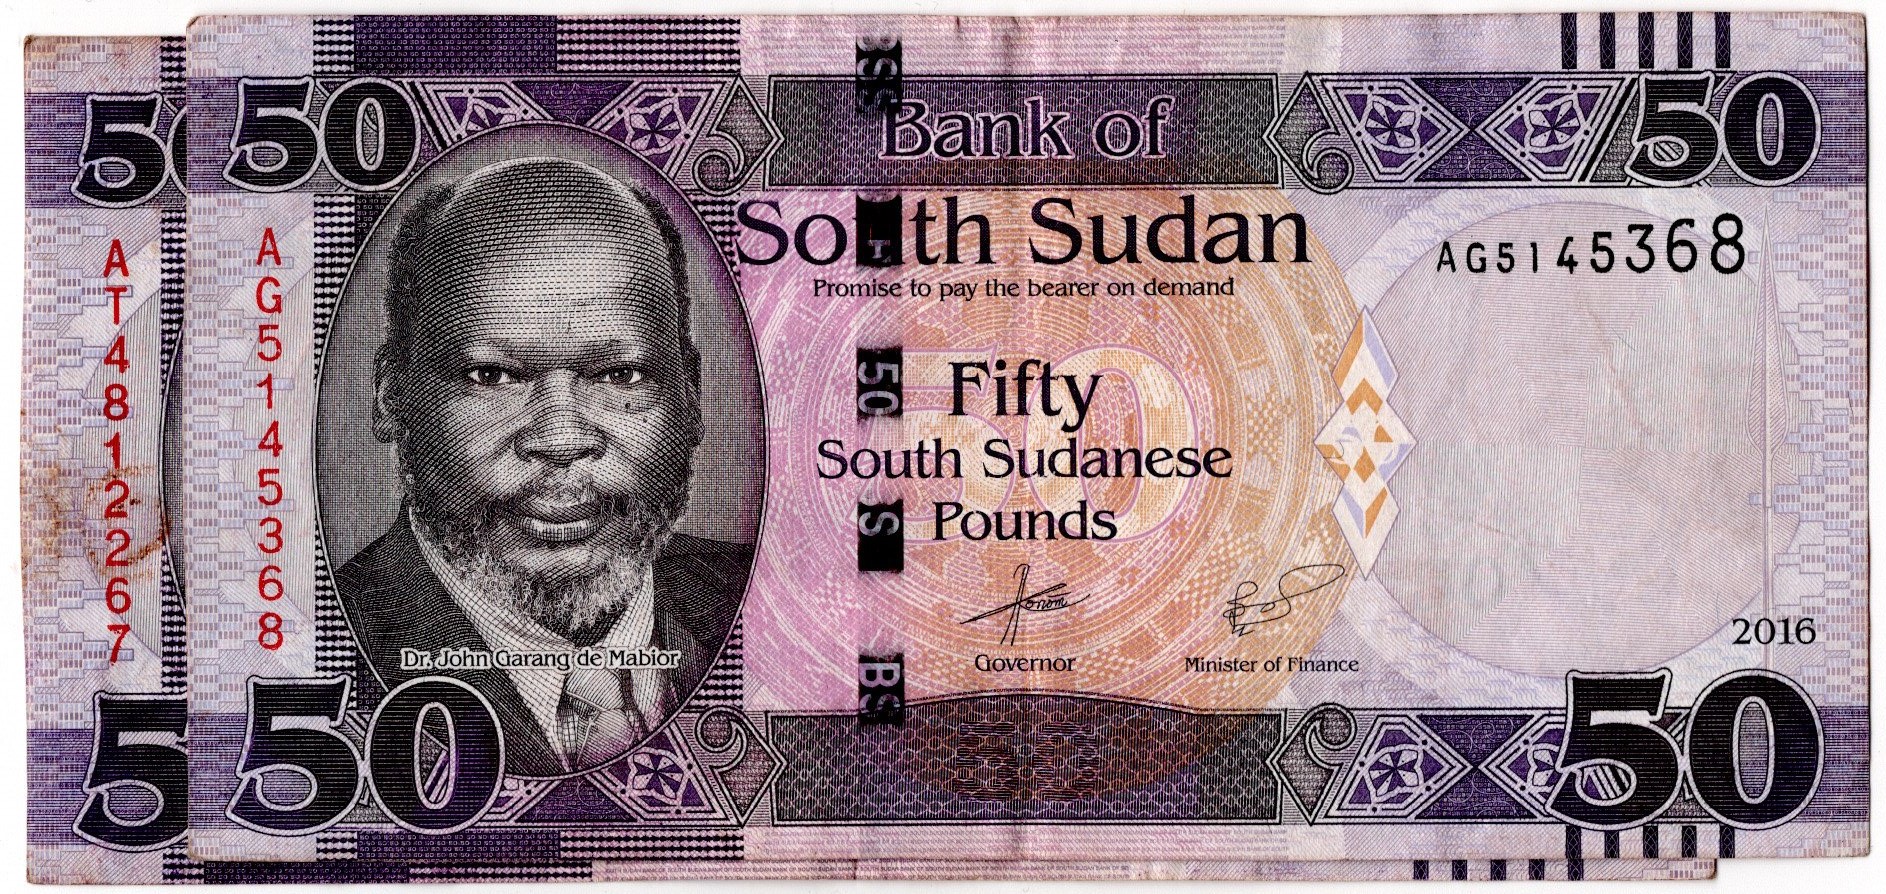 SOUTH SUDAN CURRENCY